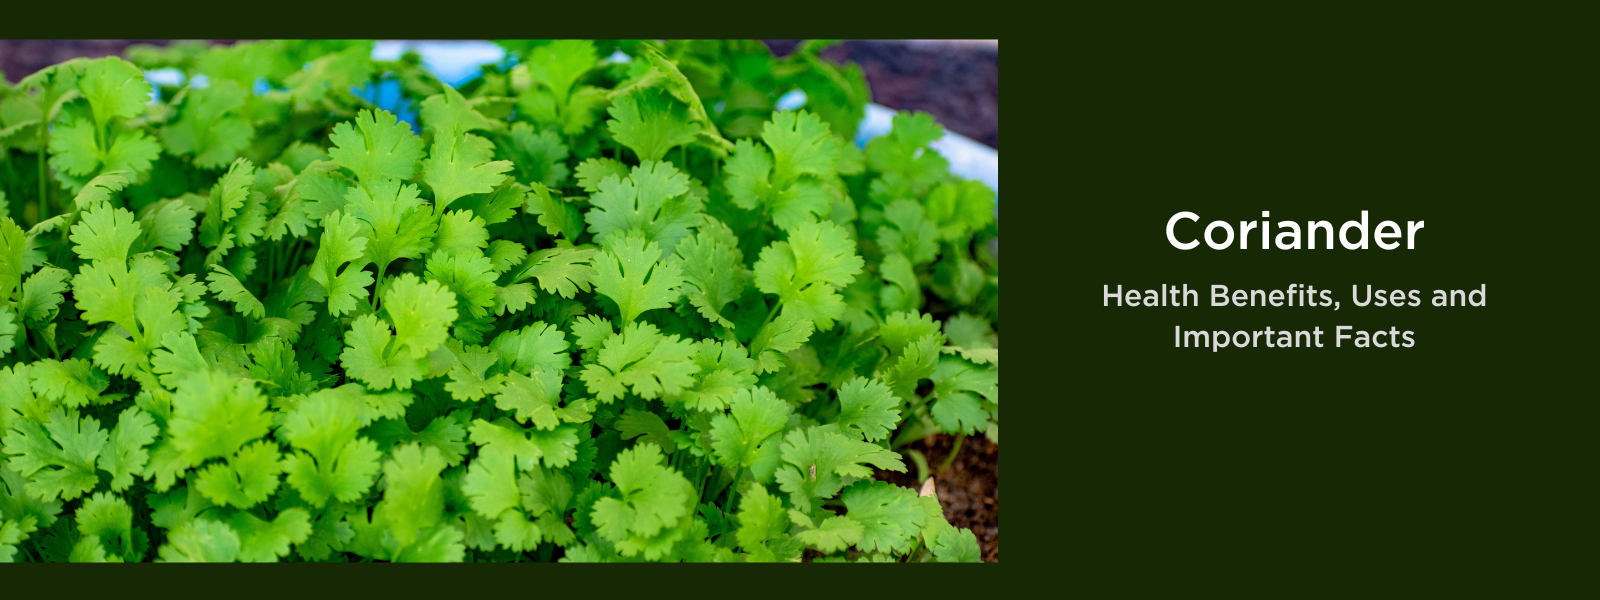 Coriander: Health Benefits, Uses and Important Facts